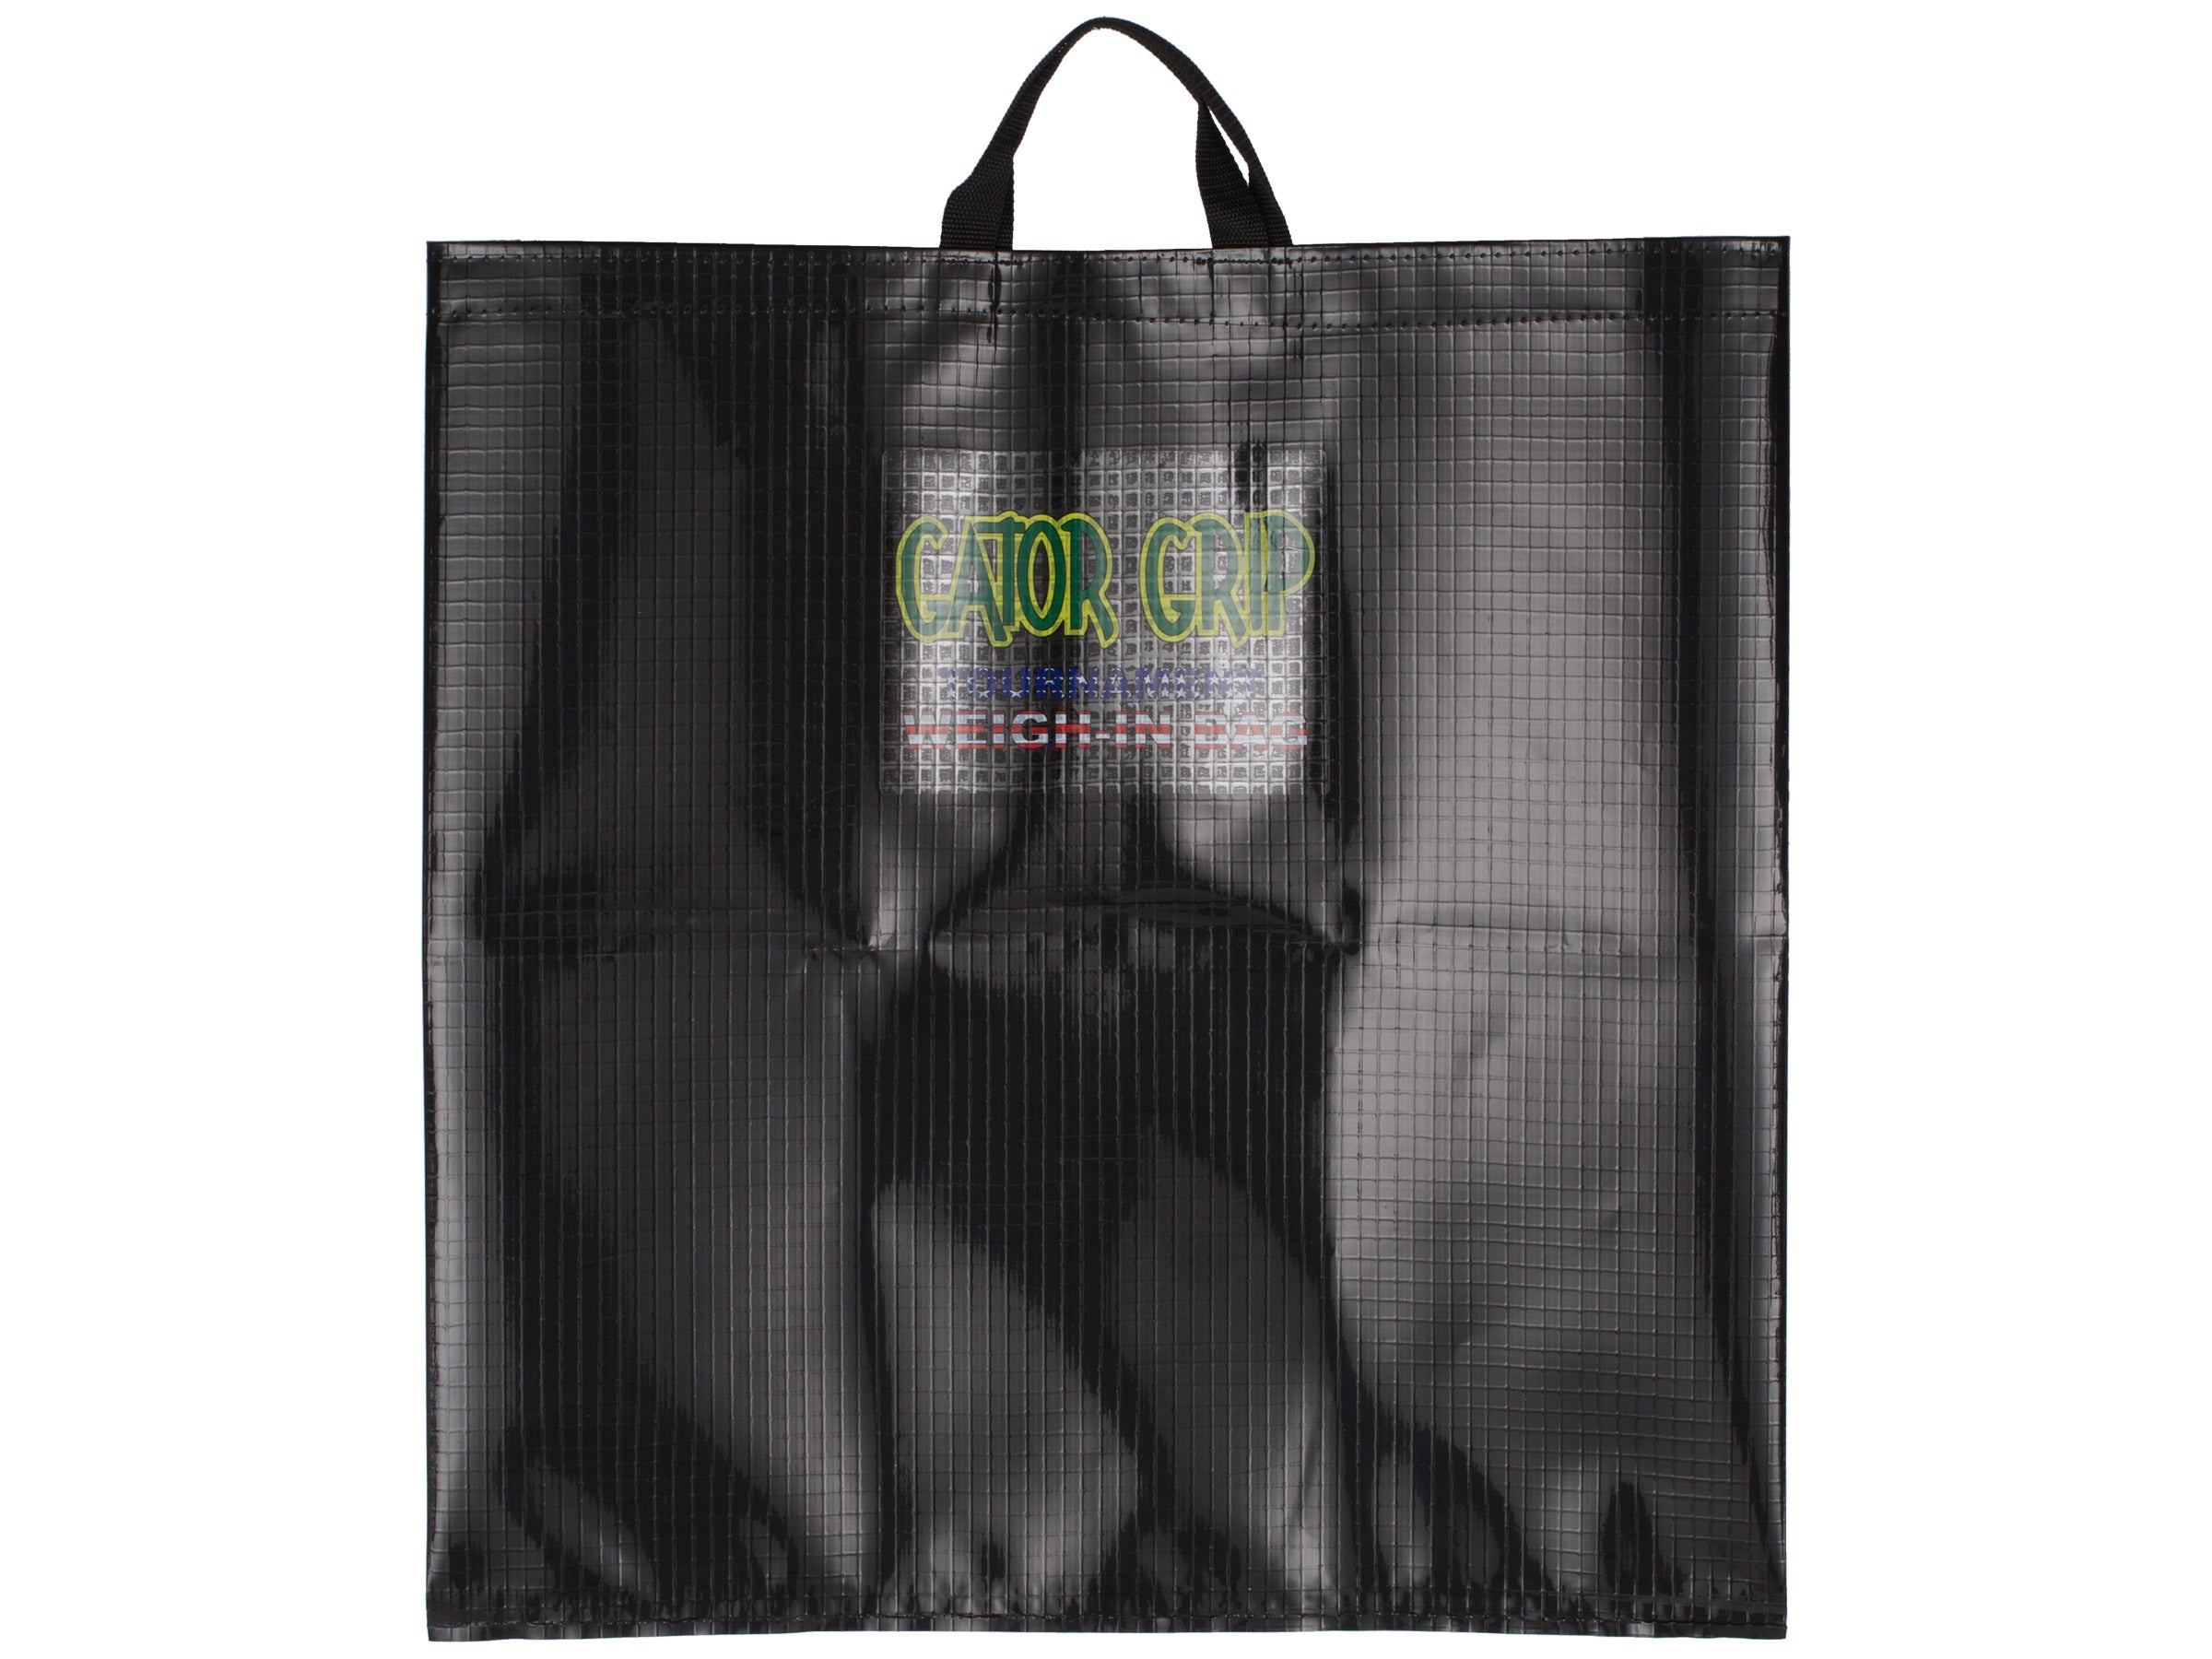 Gator Grip Weigh In Bag - Tackle Warehouse